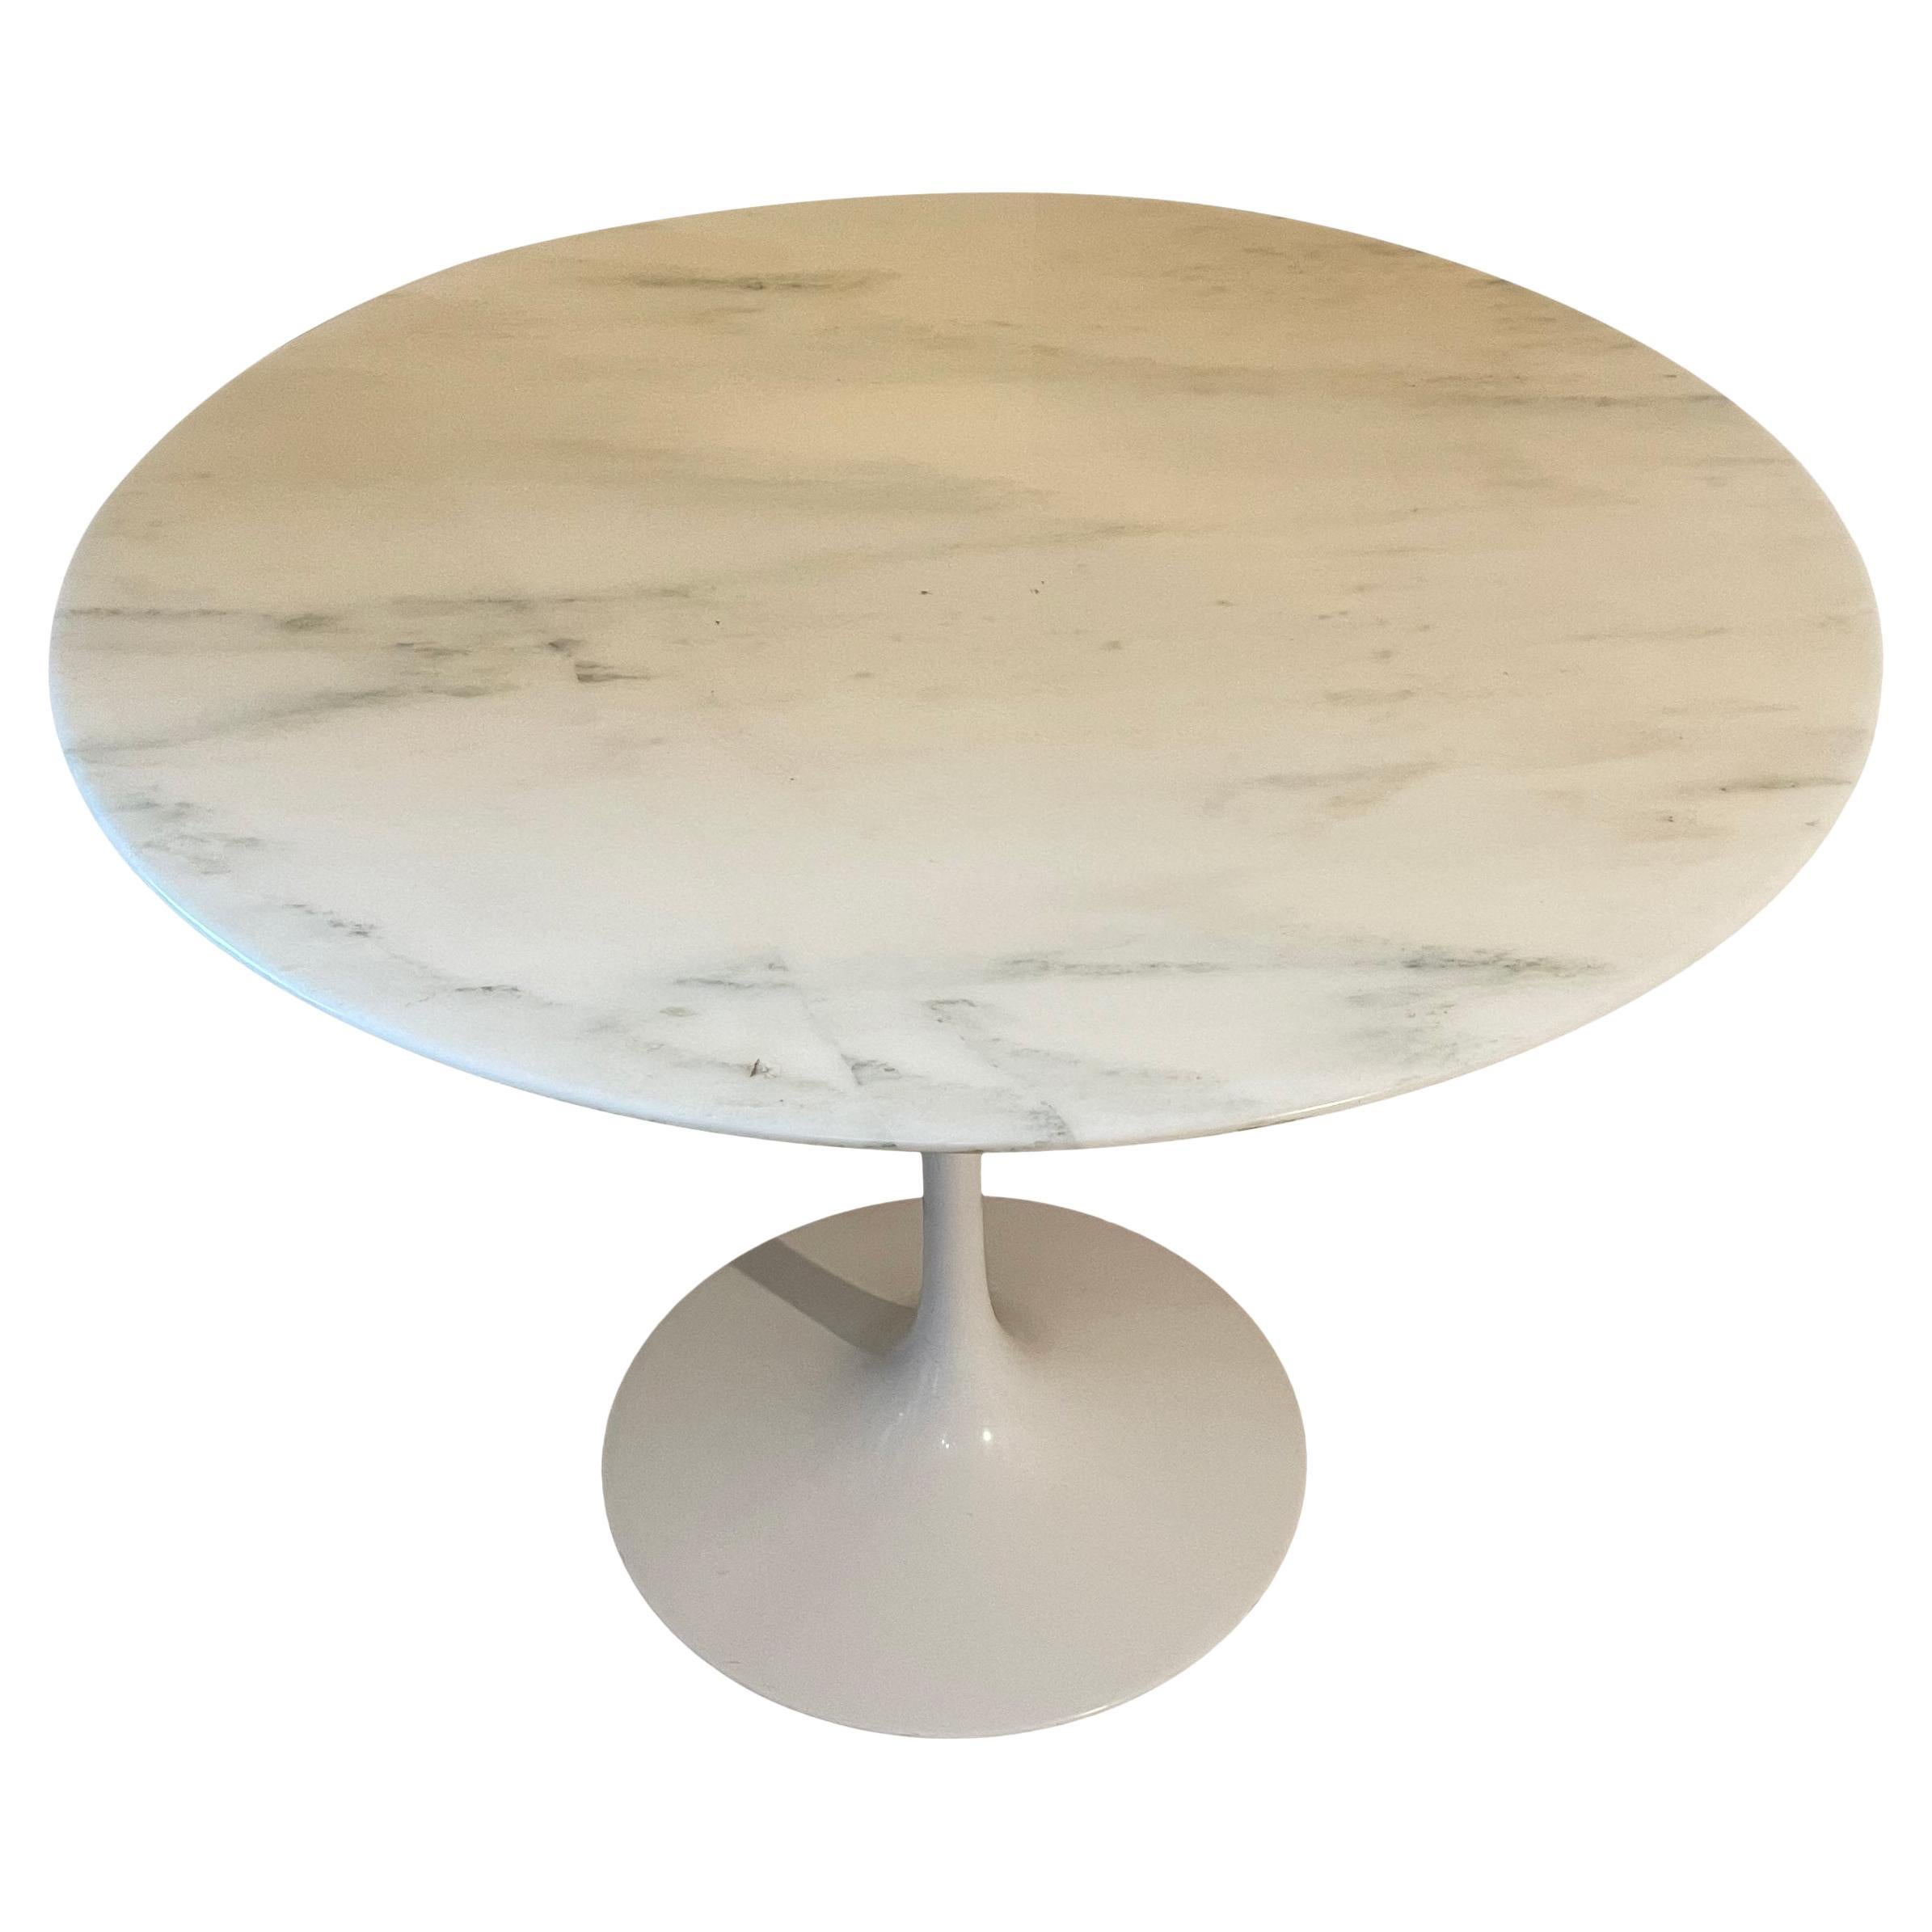 Eero Saarinen Space Age White Carrara Marble Tulip Table for Knoll, 1967 For Sale